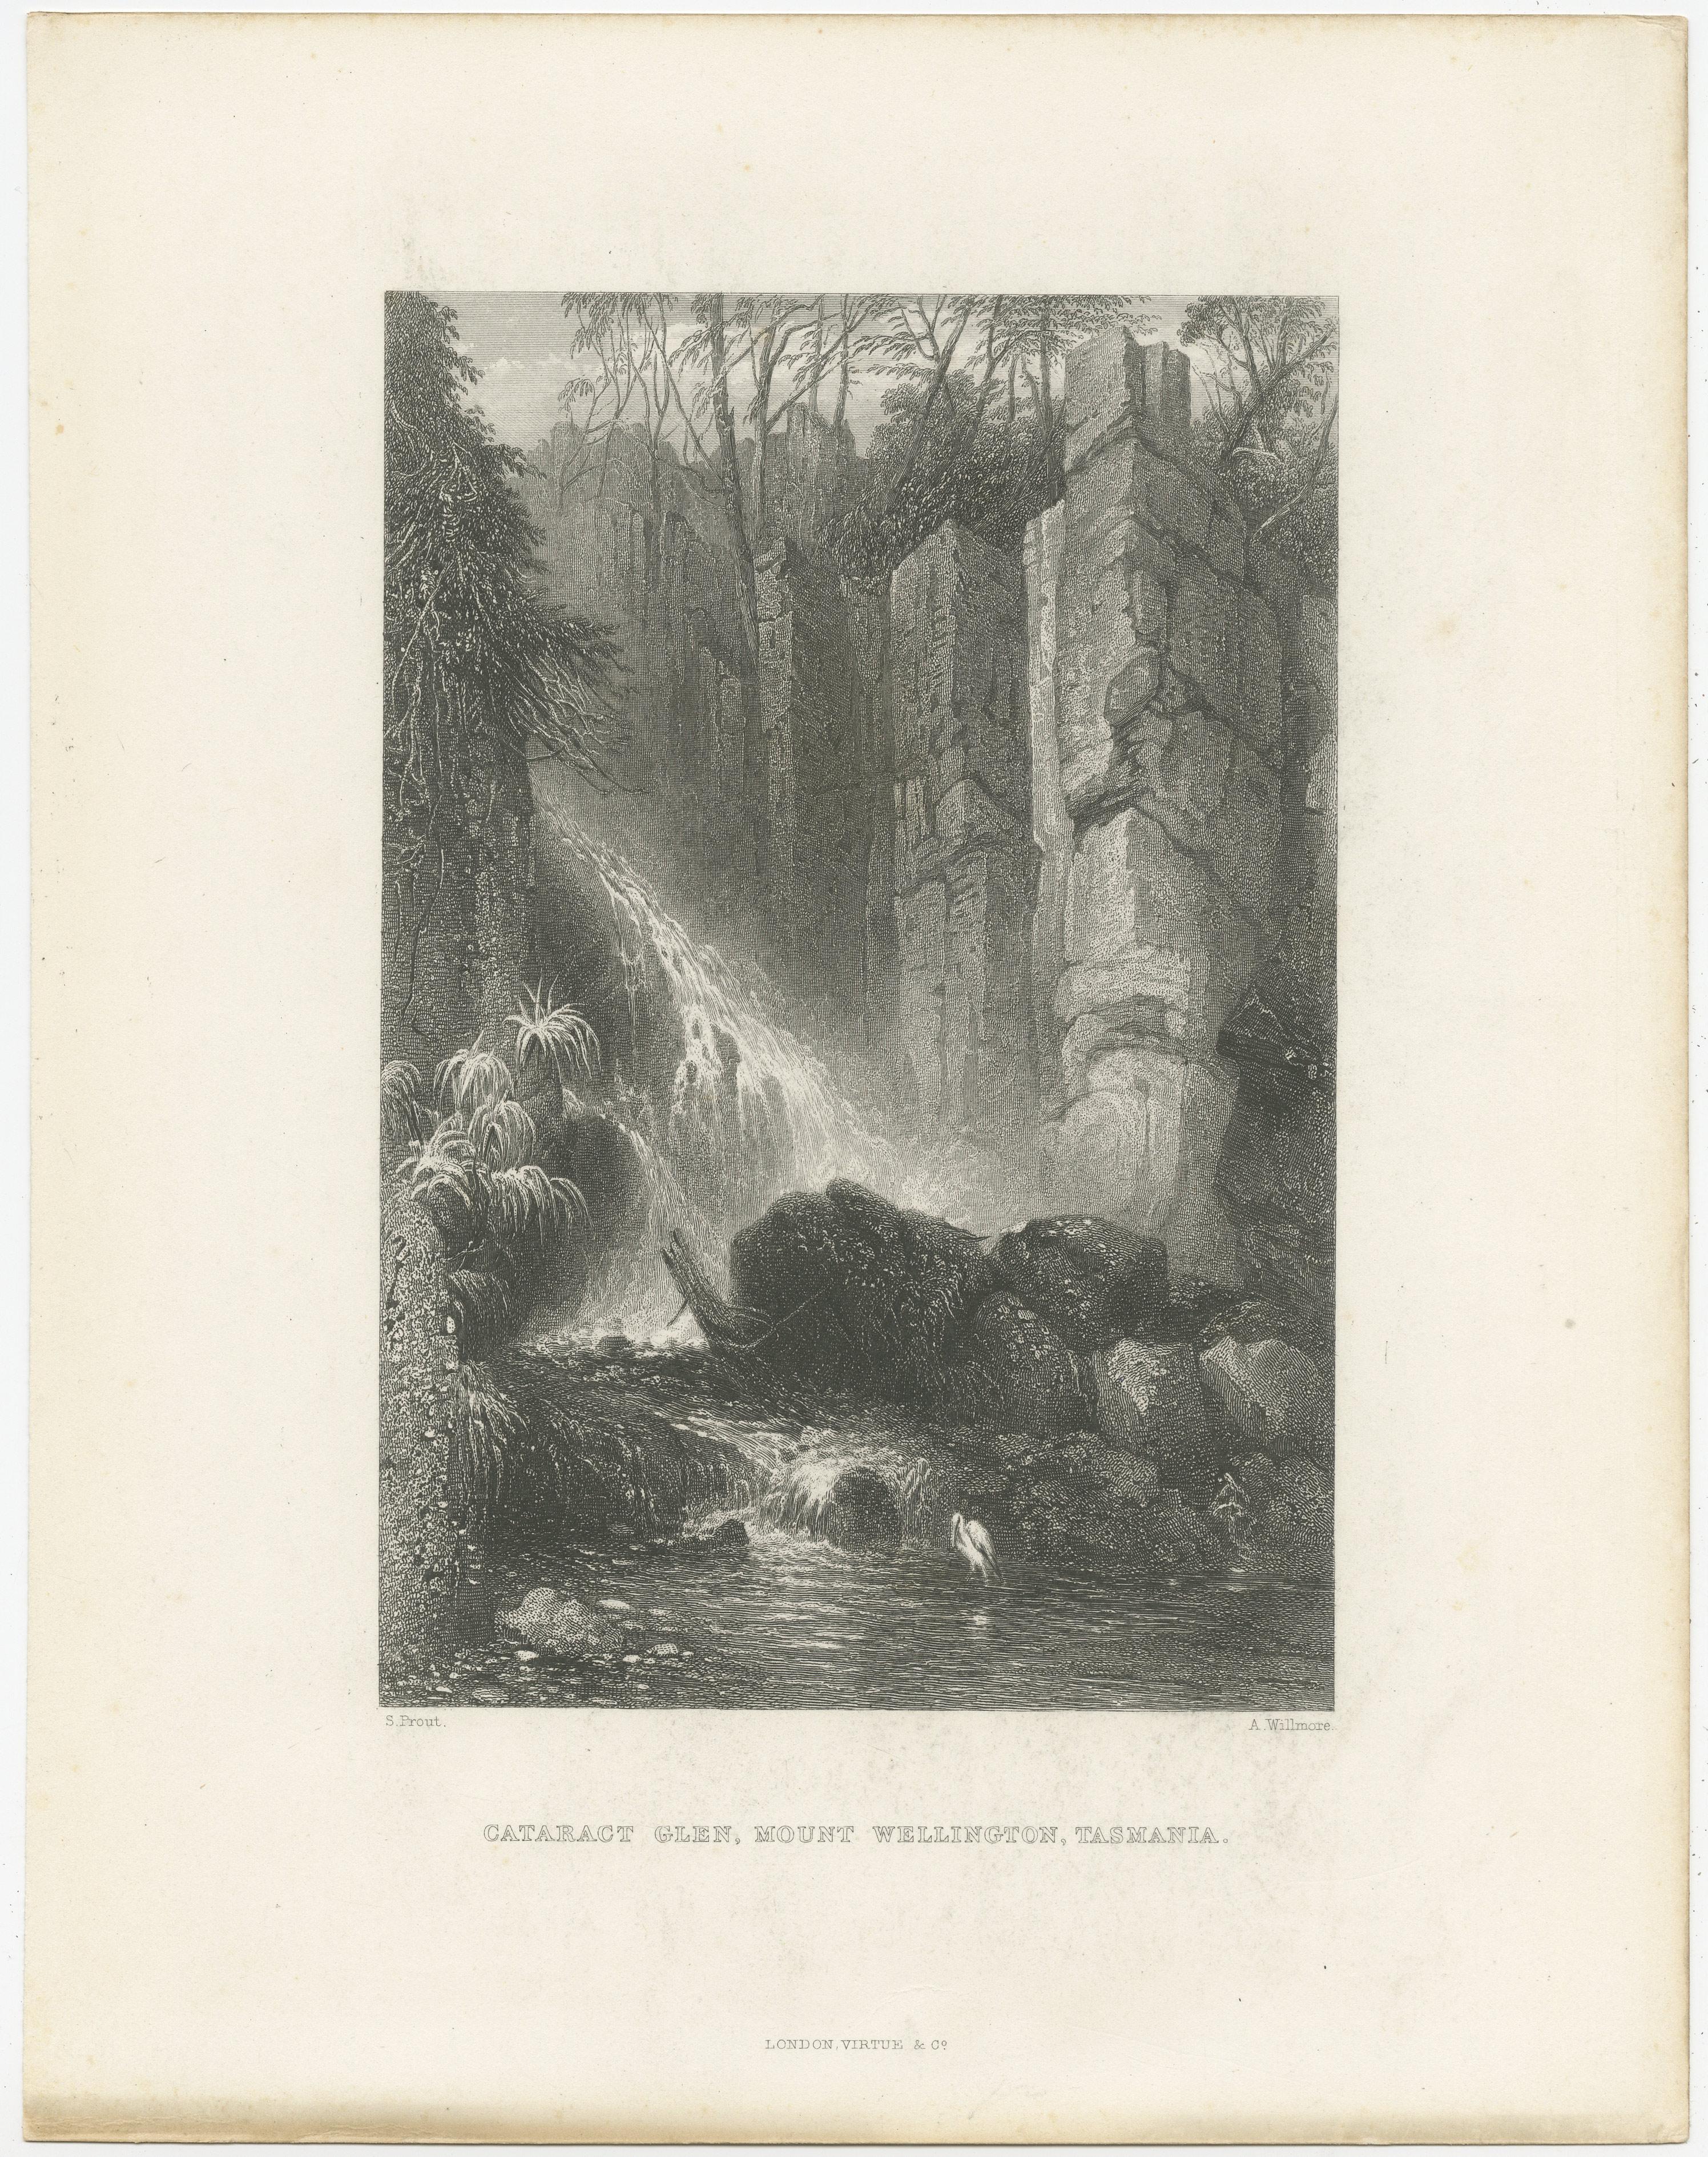 Antique print titled 'Cataract Glen, Mount Wellington, Tasmania'. View of a lovely waterfall with a heron, near Mount Wellington in Tasmania, Australia. Engraved by A. Willmore after S. Prout. Published by Virtue & Co, circa 1875.